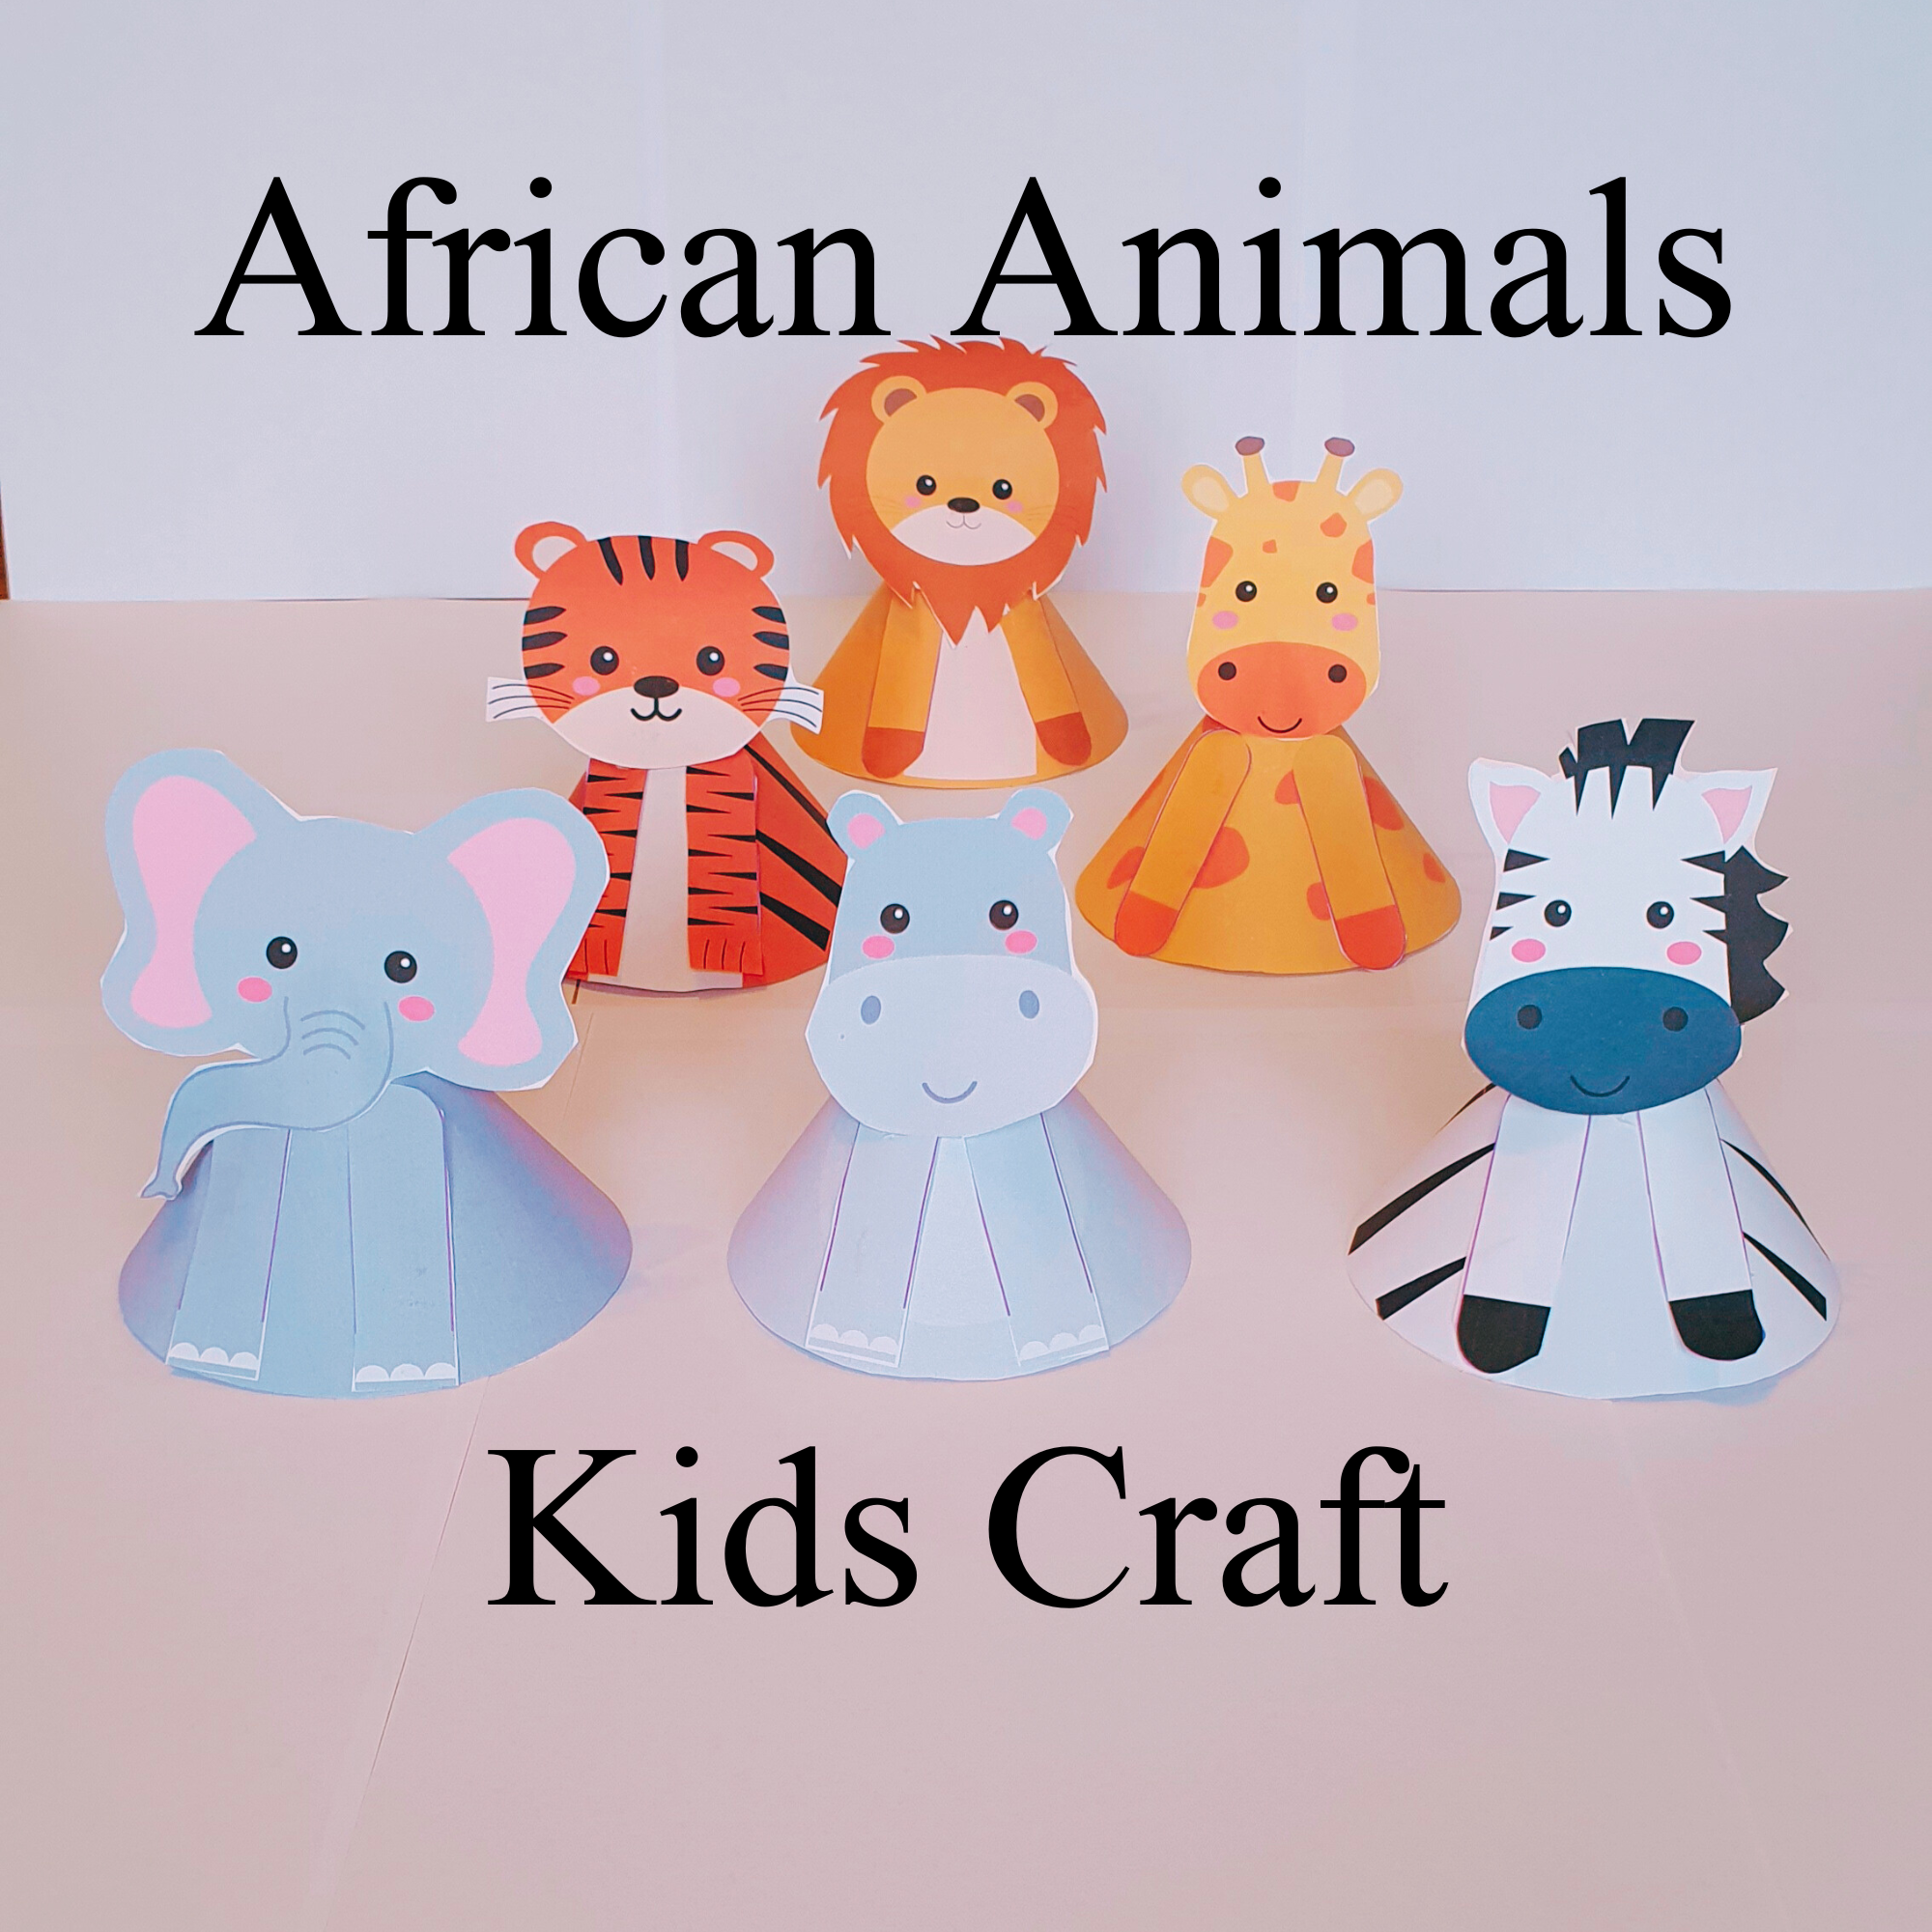 Kids Will Love Making This Easy African Jungle Animal Craft